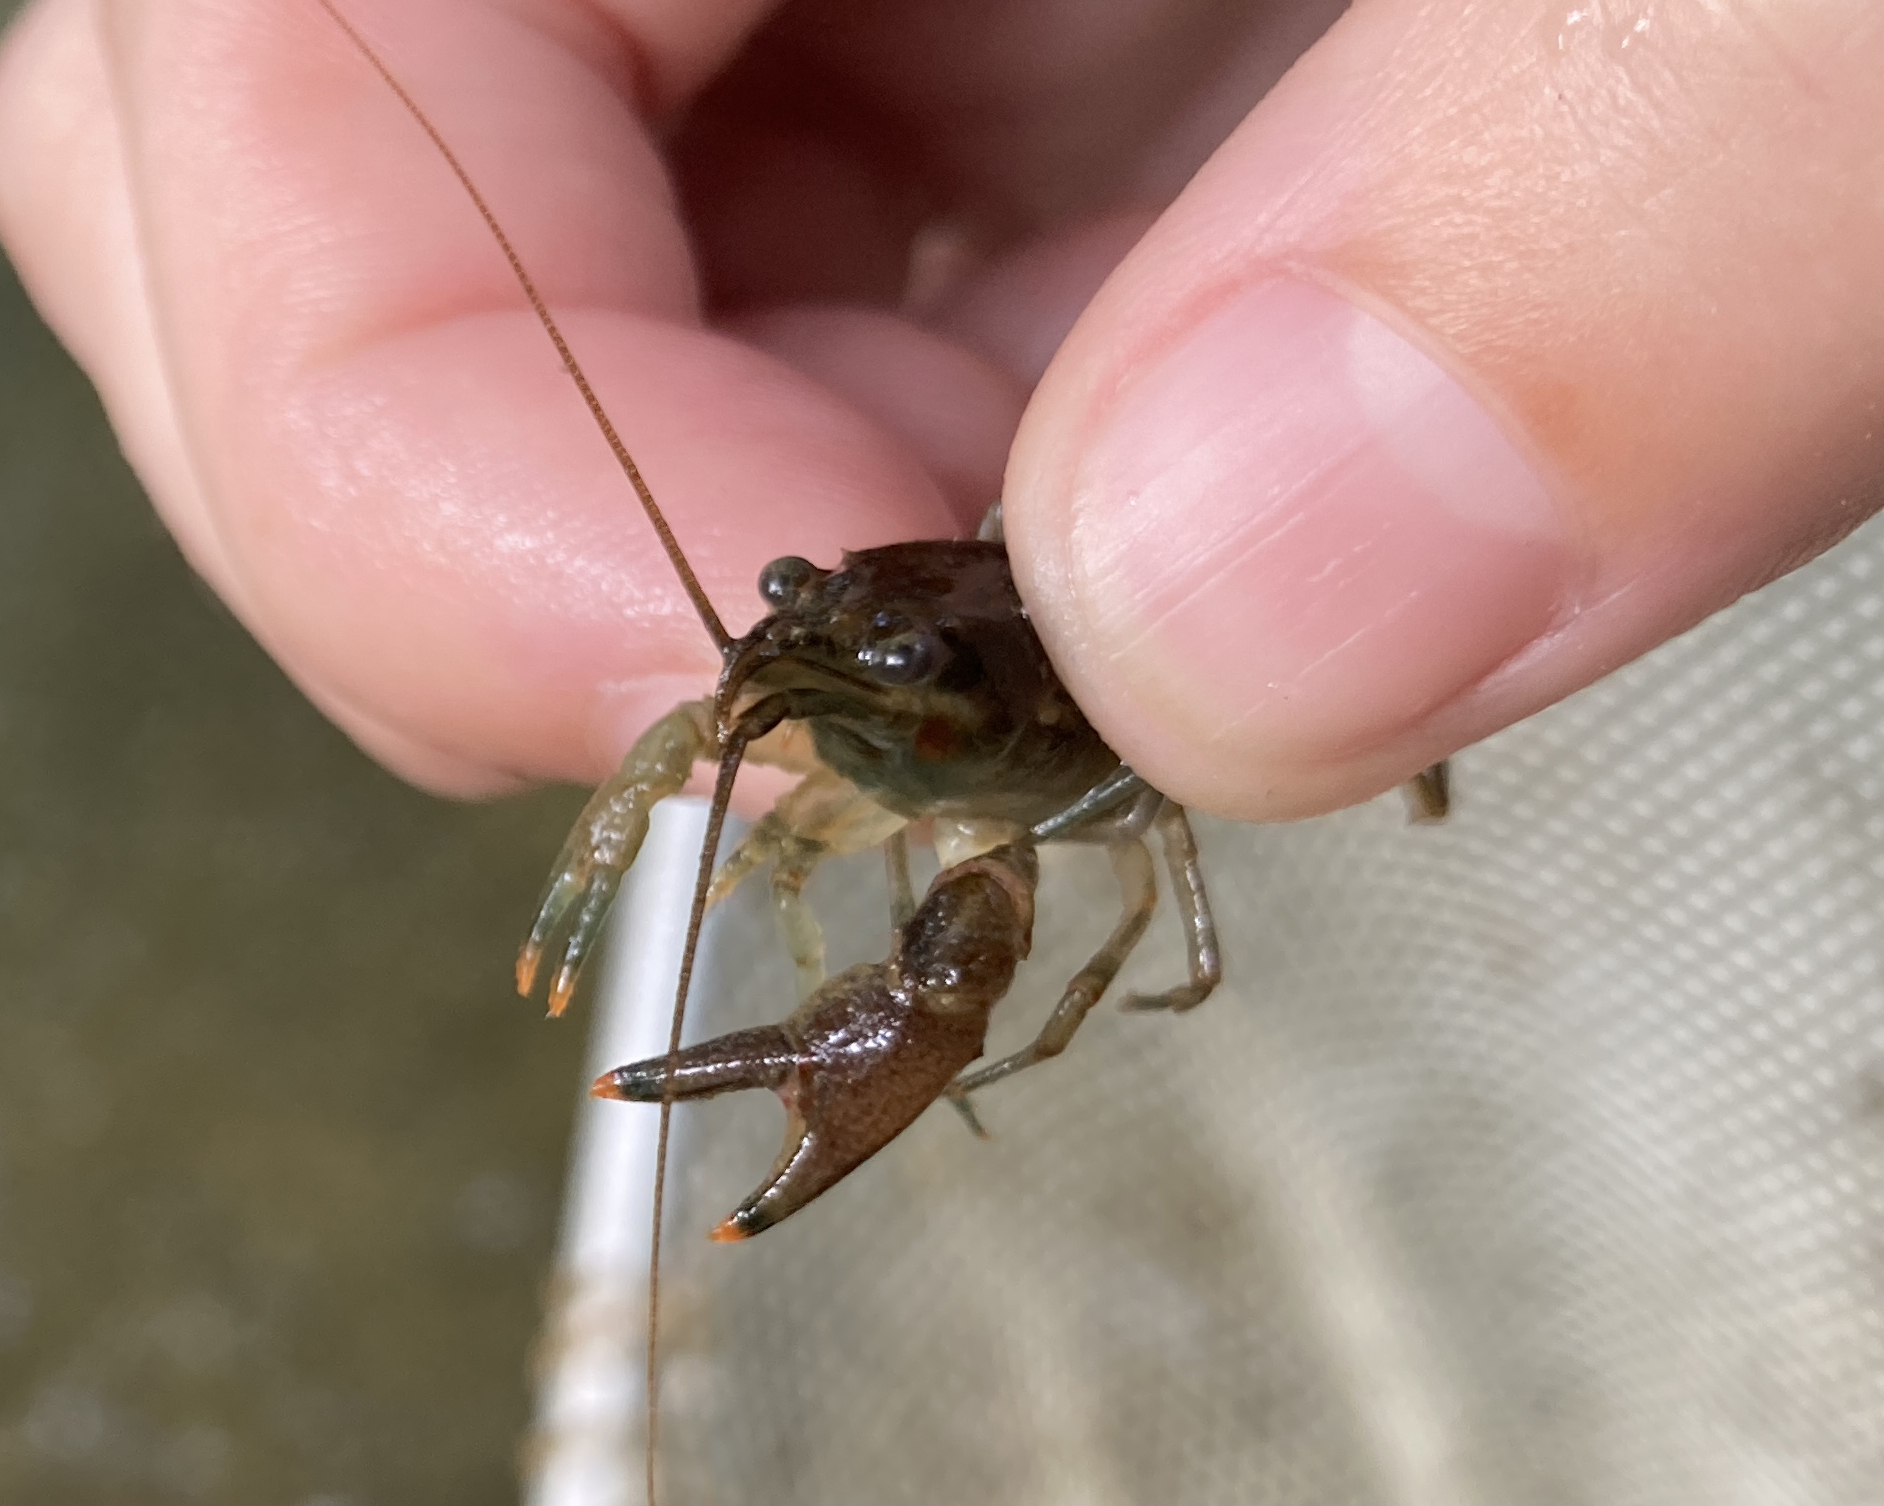 Crayfish Corps - Valley Forge National Historical Park (U.S.